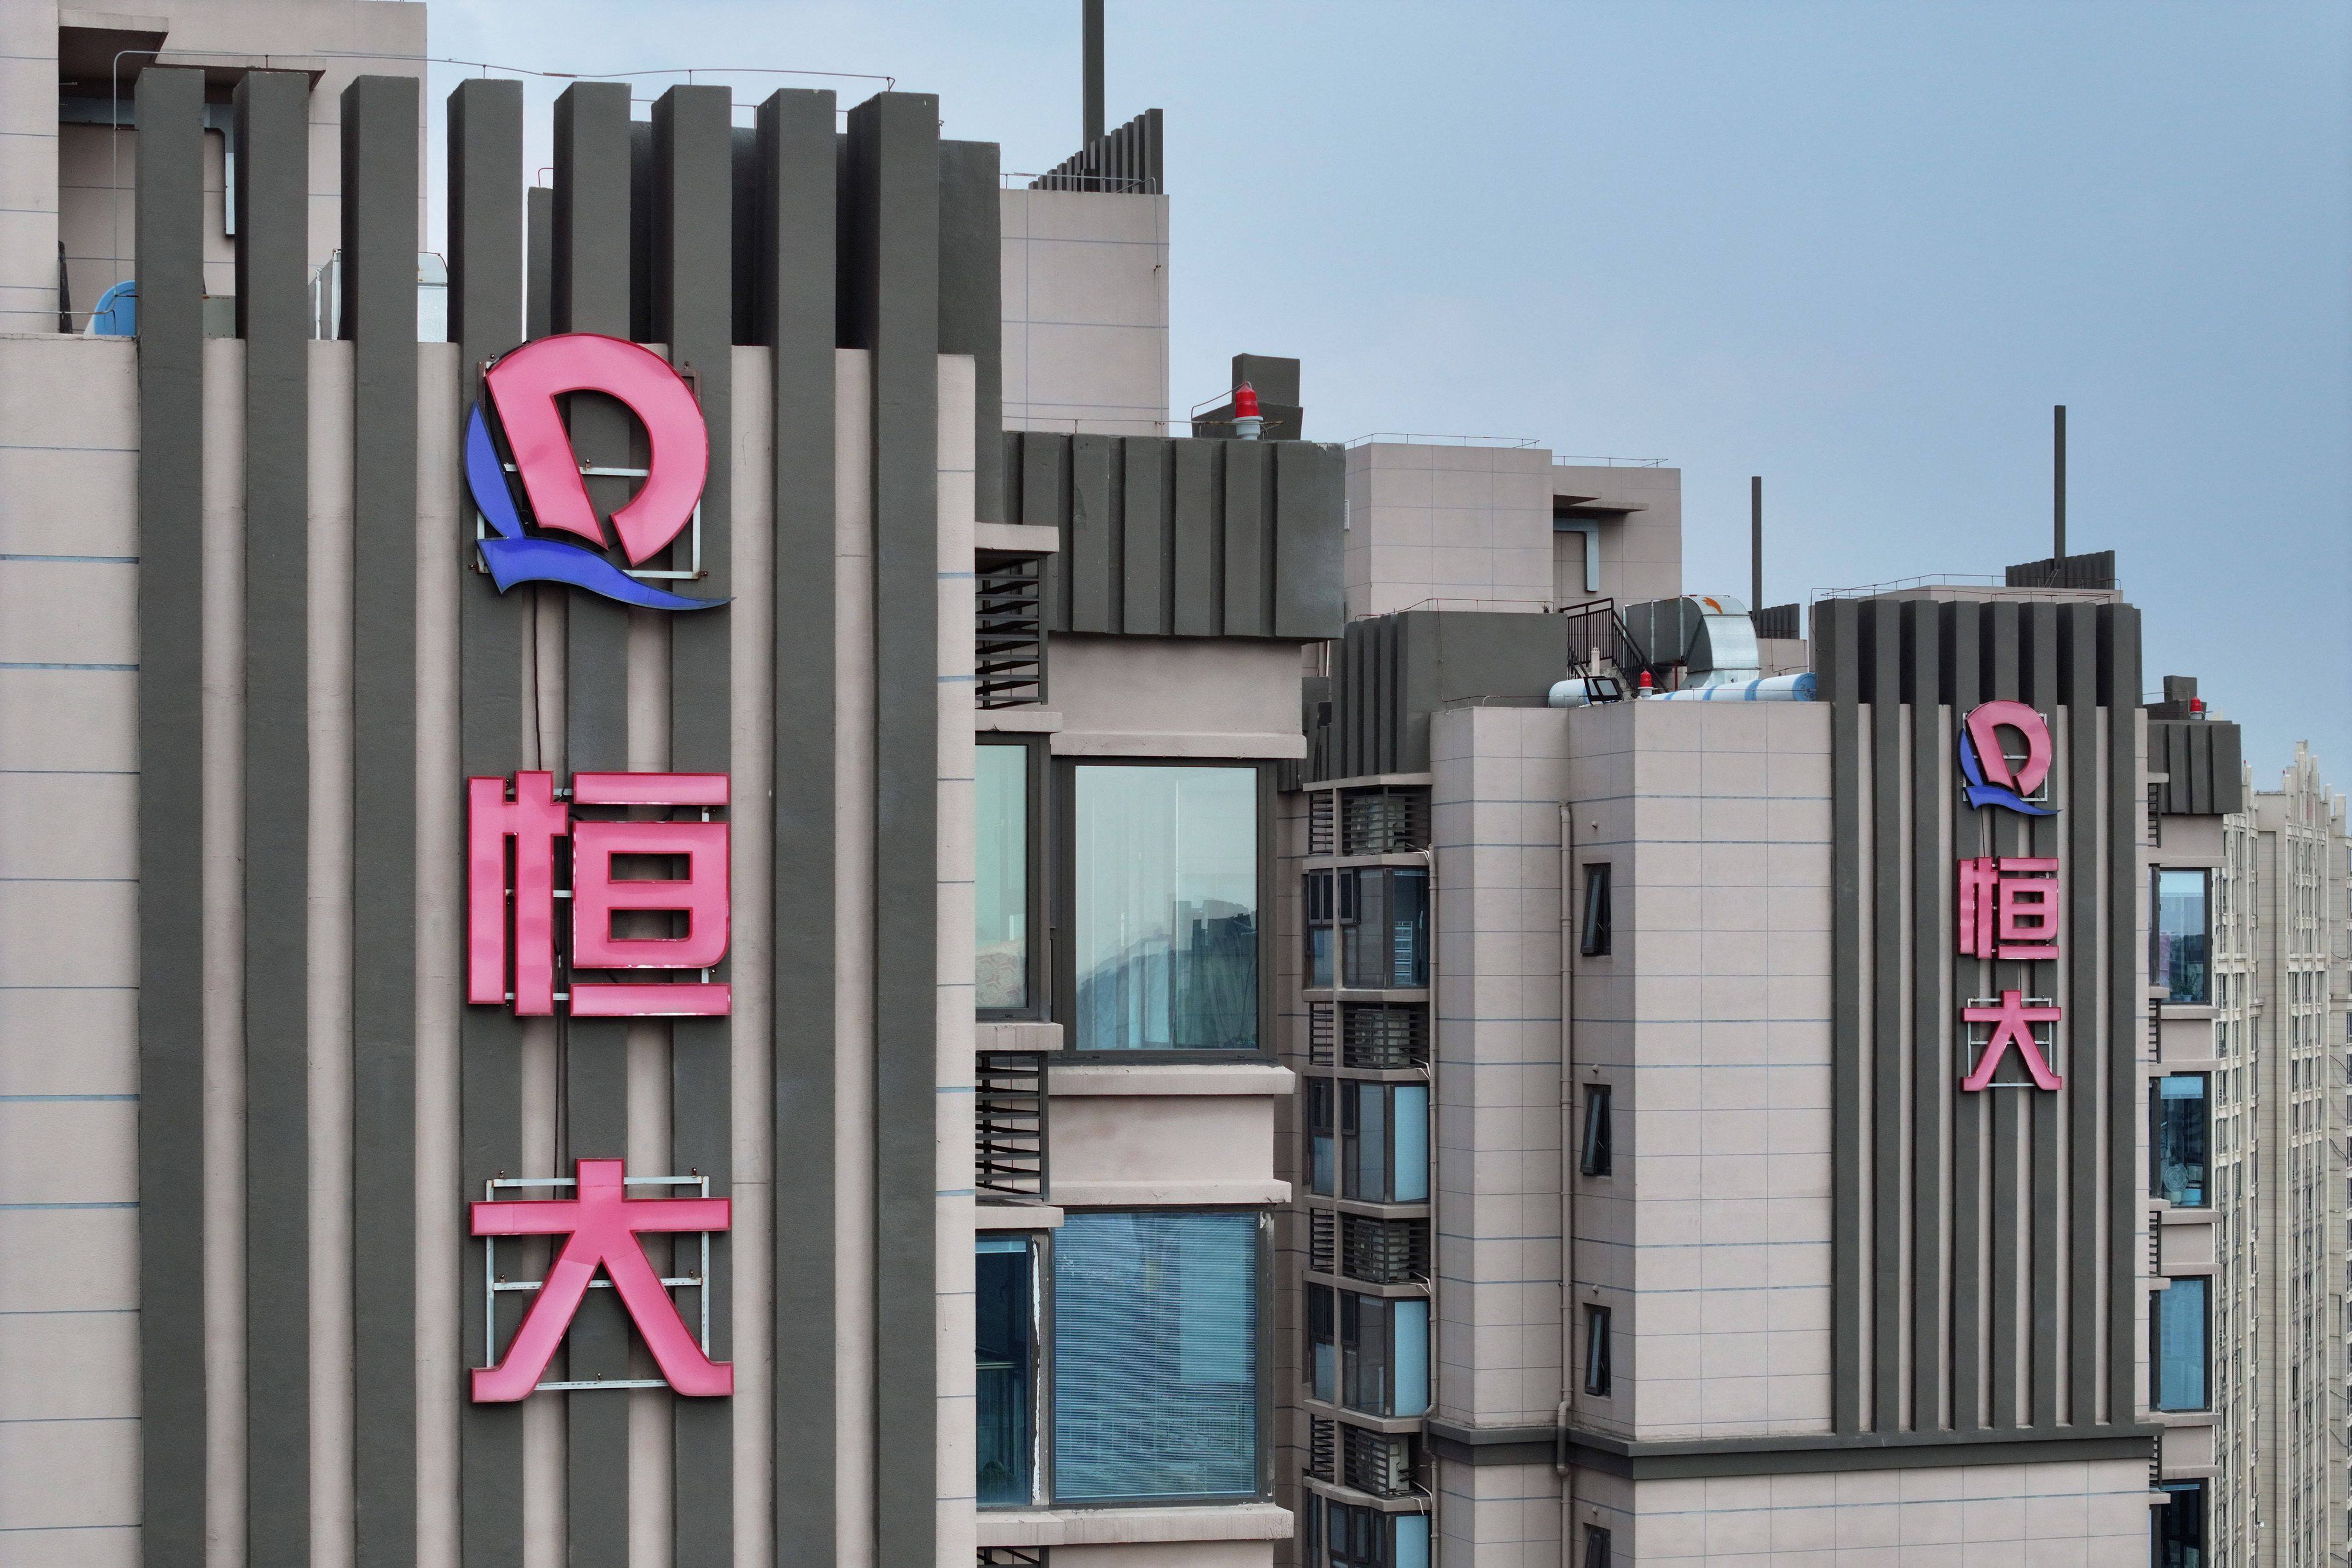 China Evergrande Group’s logo is seen on residential buildings in Nanjing, capital of eastern Jiangsu province, on August 18, 2023. Photo: AFP